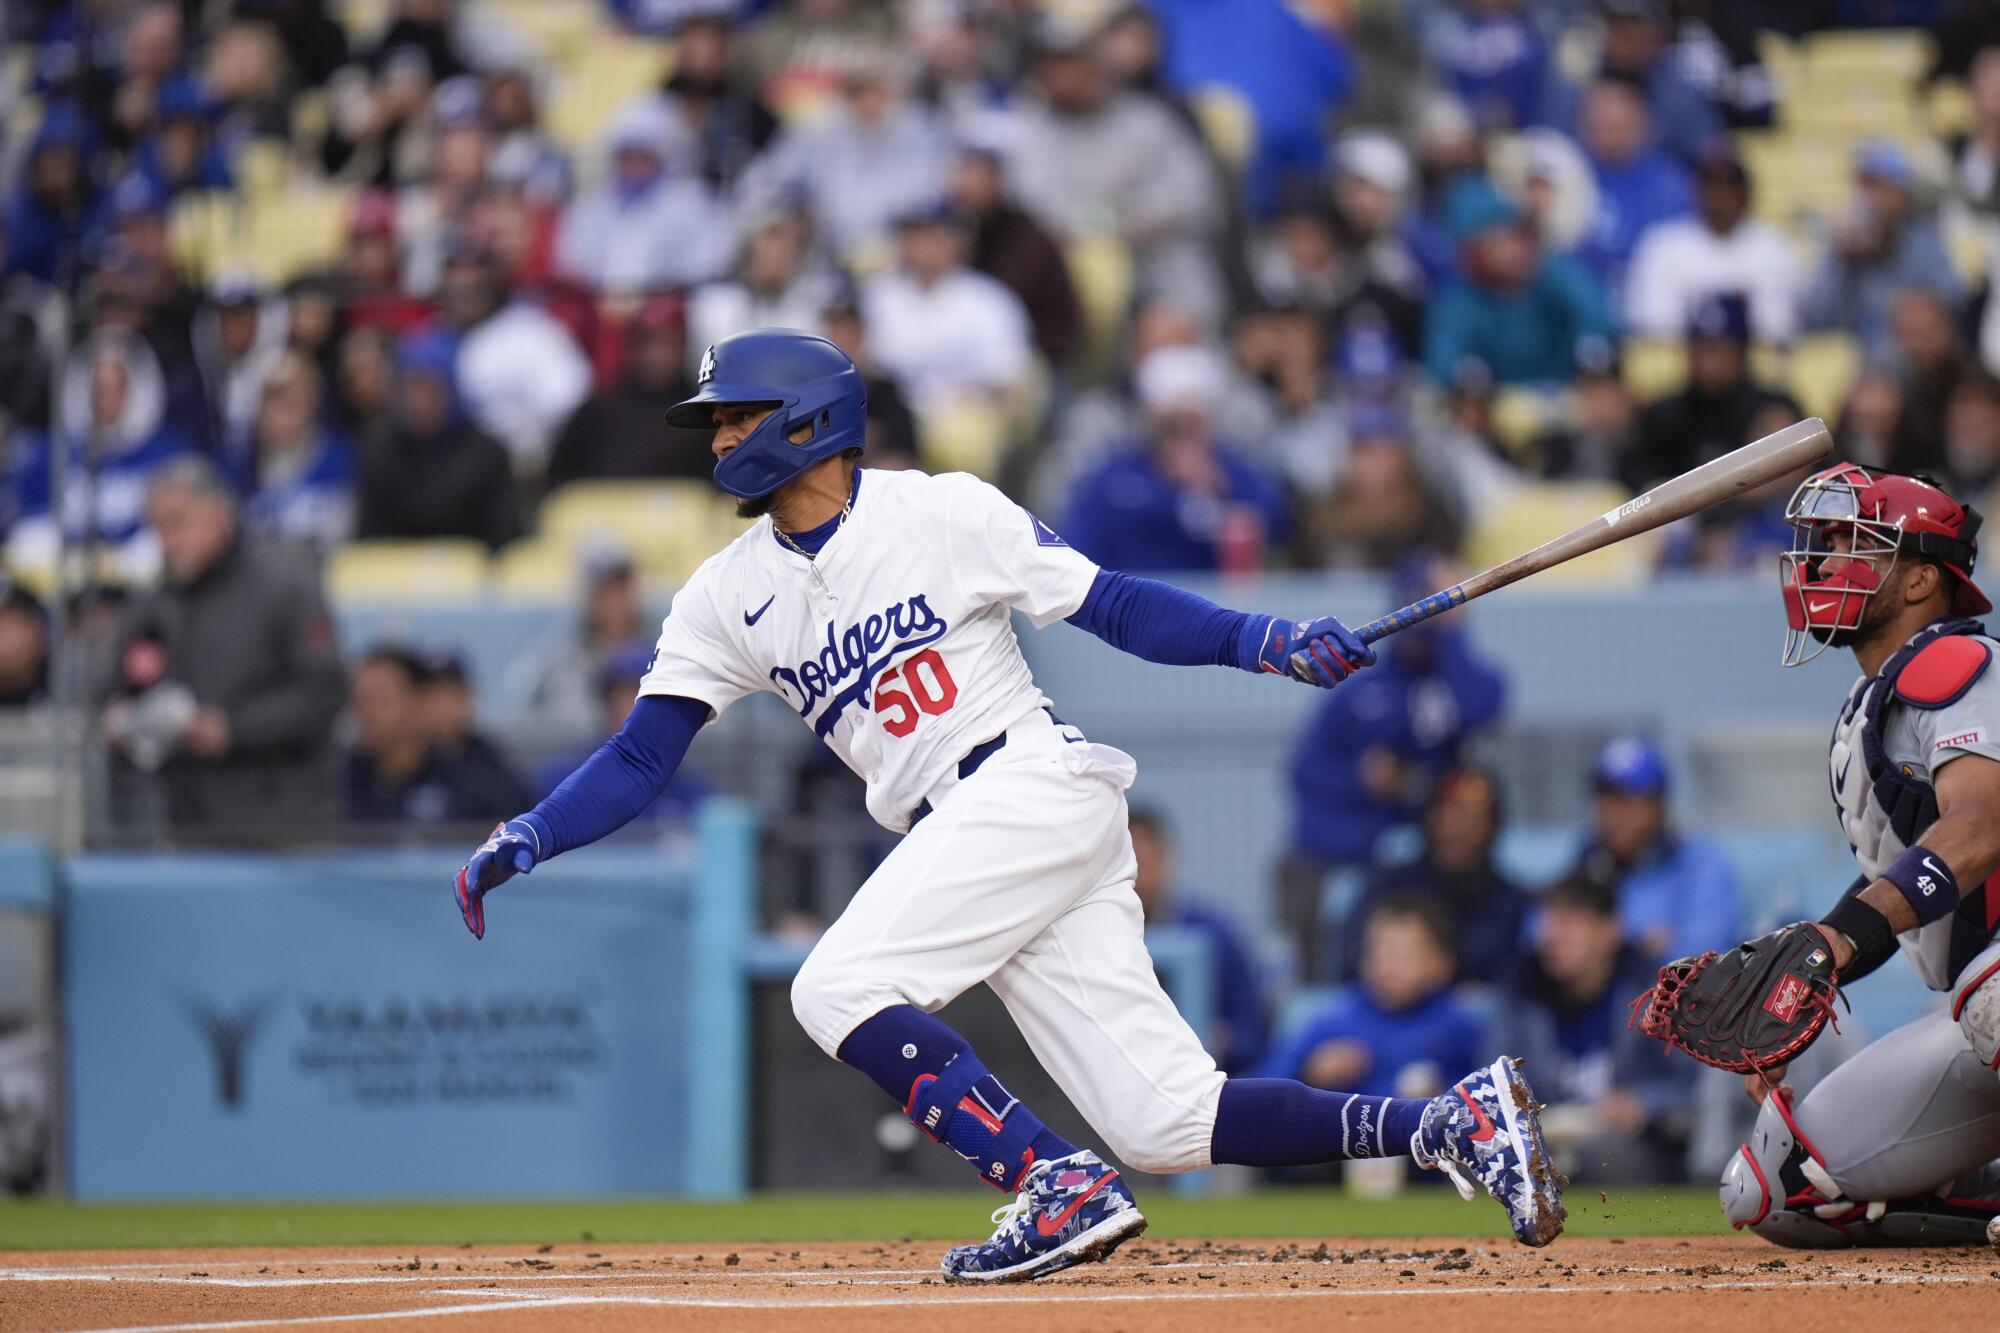 Dodgers shortstop Mookie Betts follows through with his swing after hitting a single during the first inning Saturday.